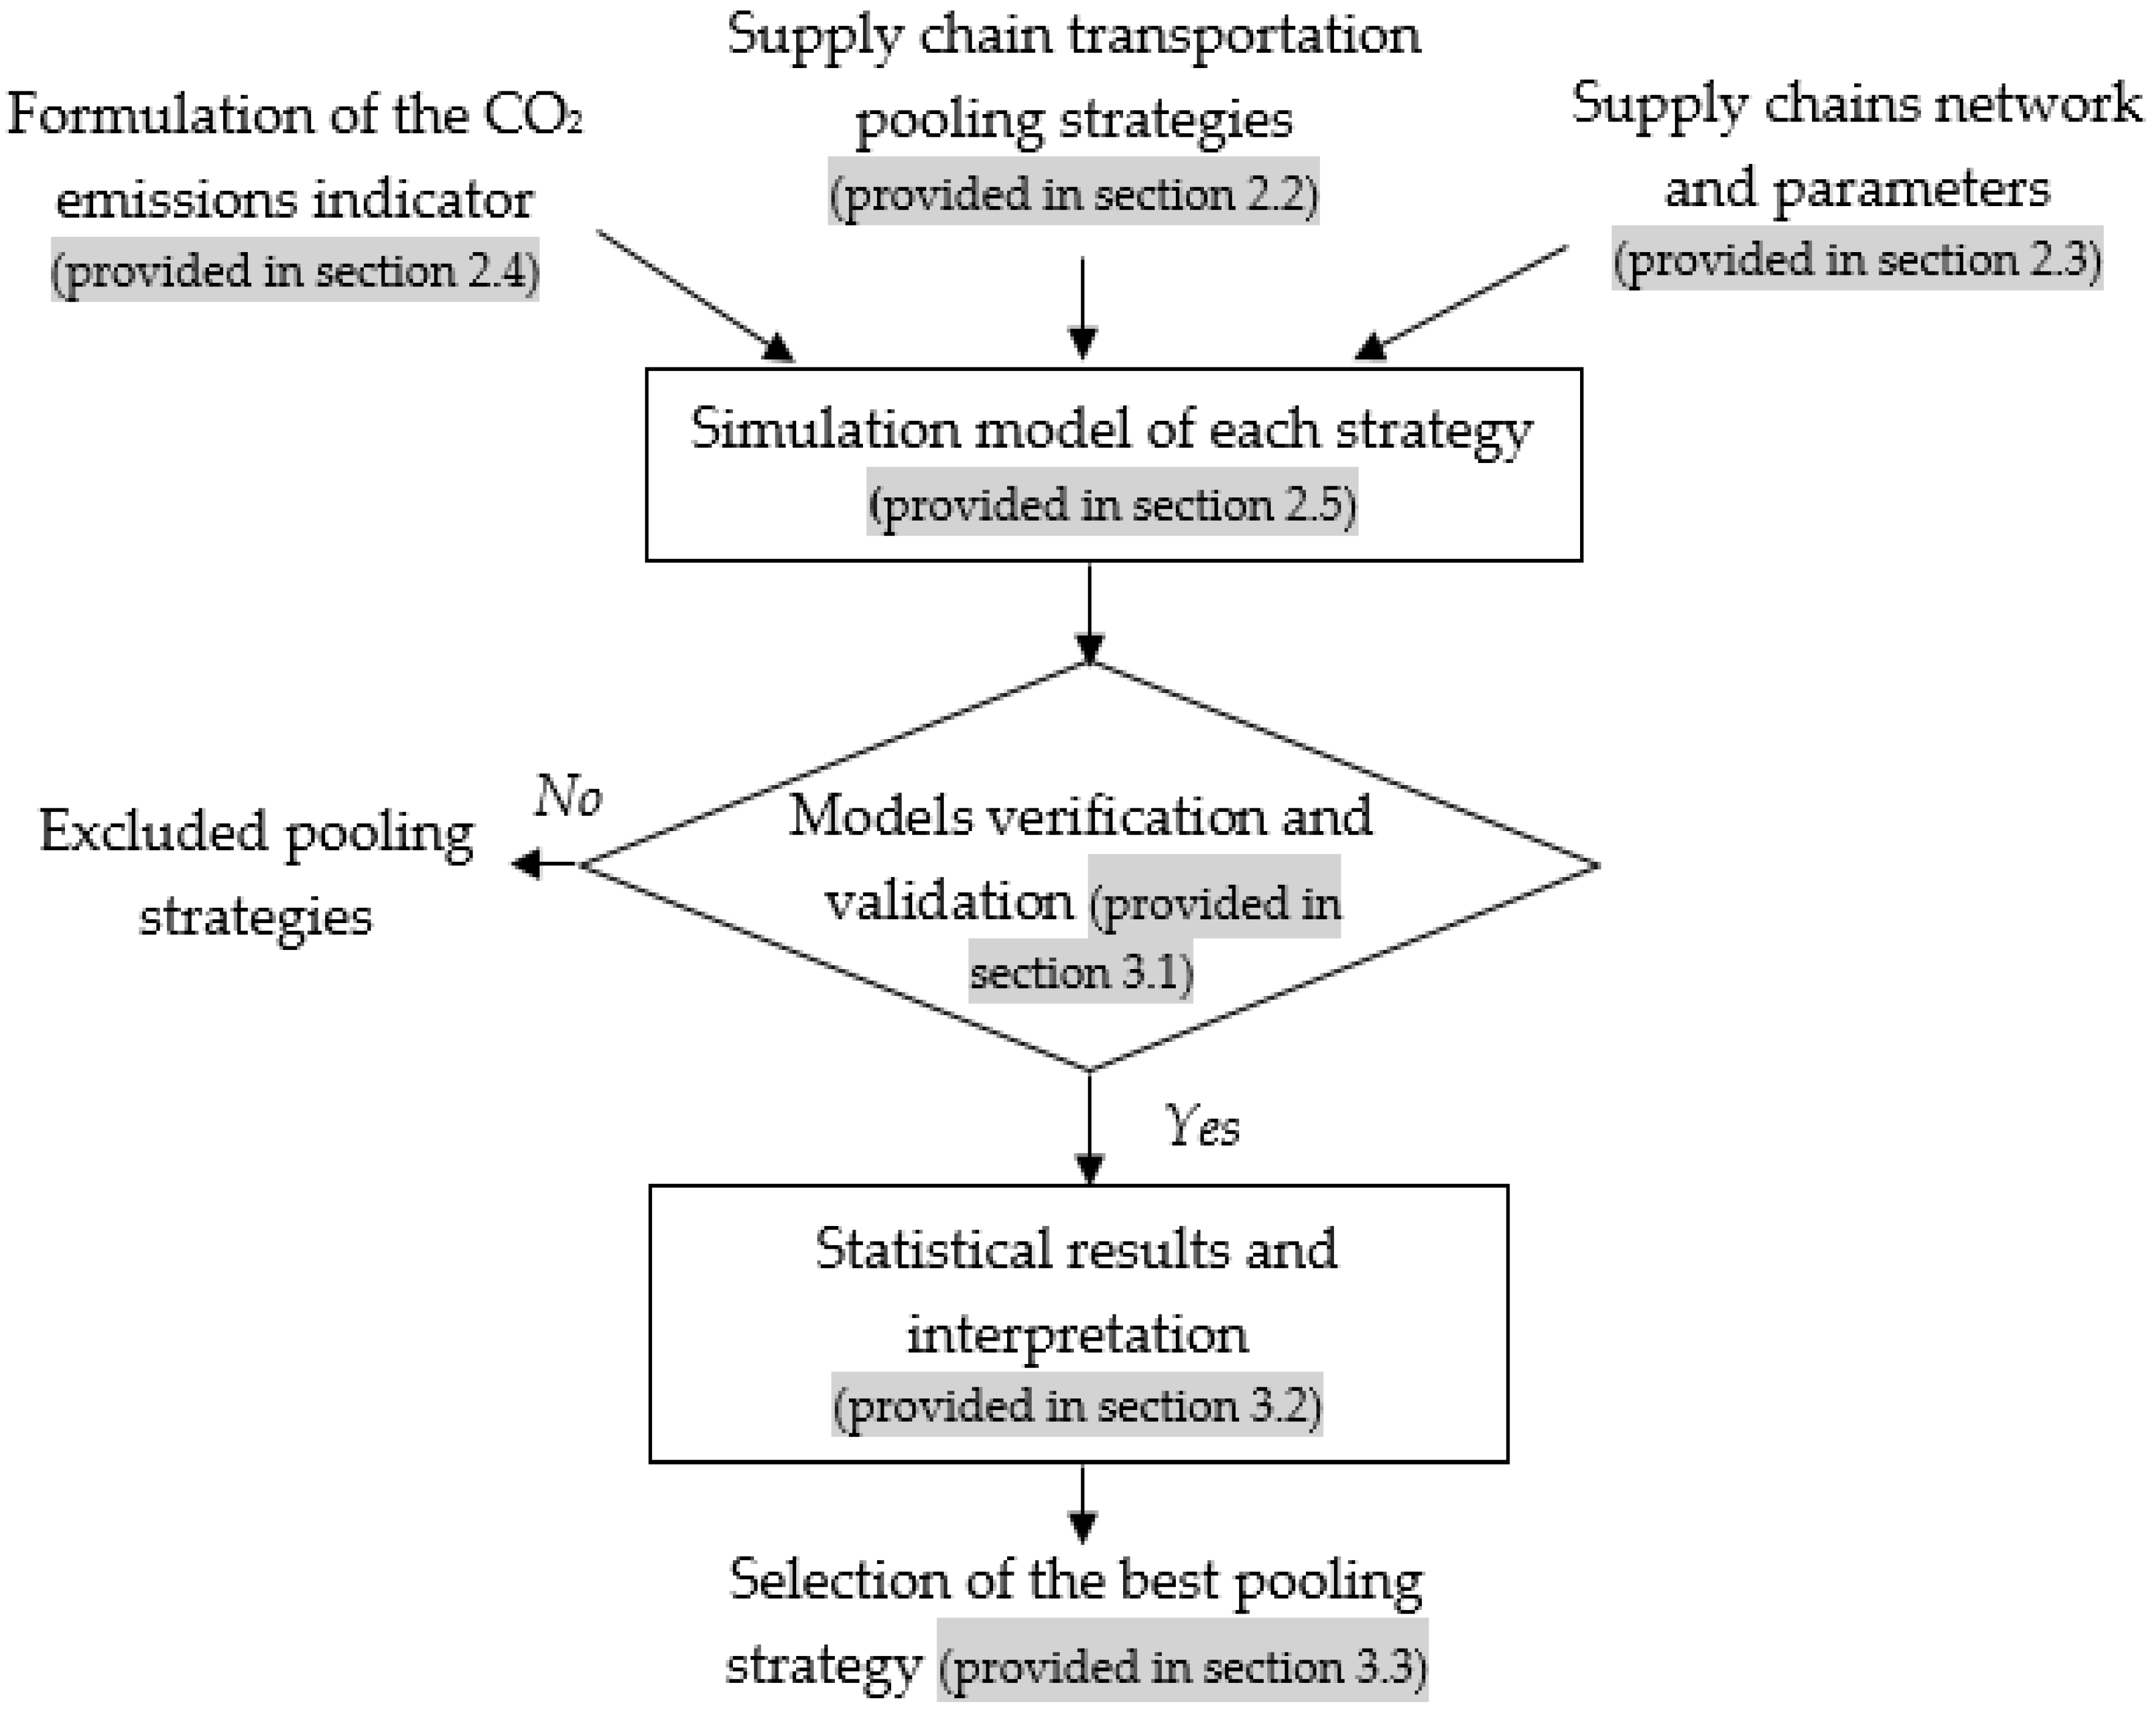 Arena simulation model for closed loop supply chain network for spent